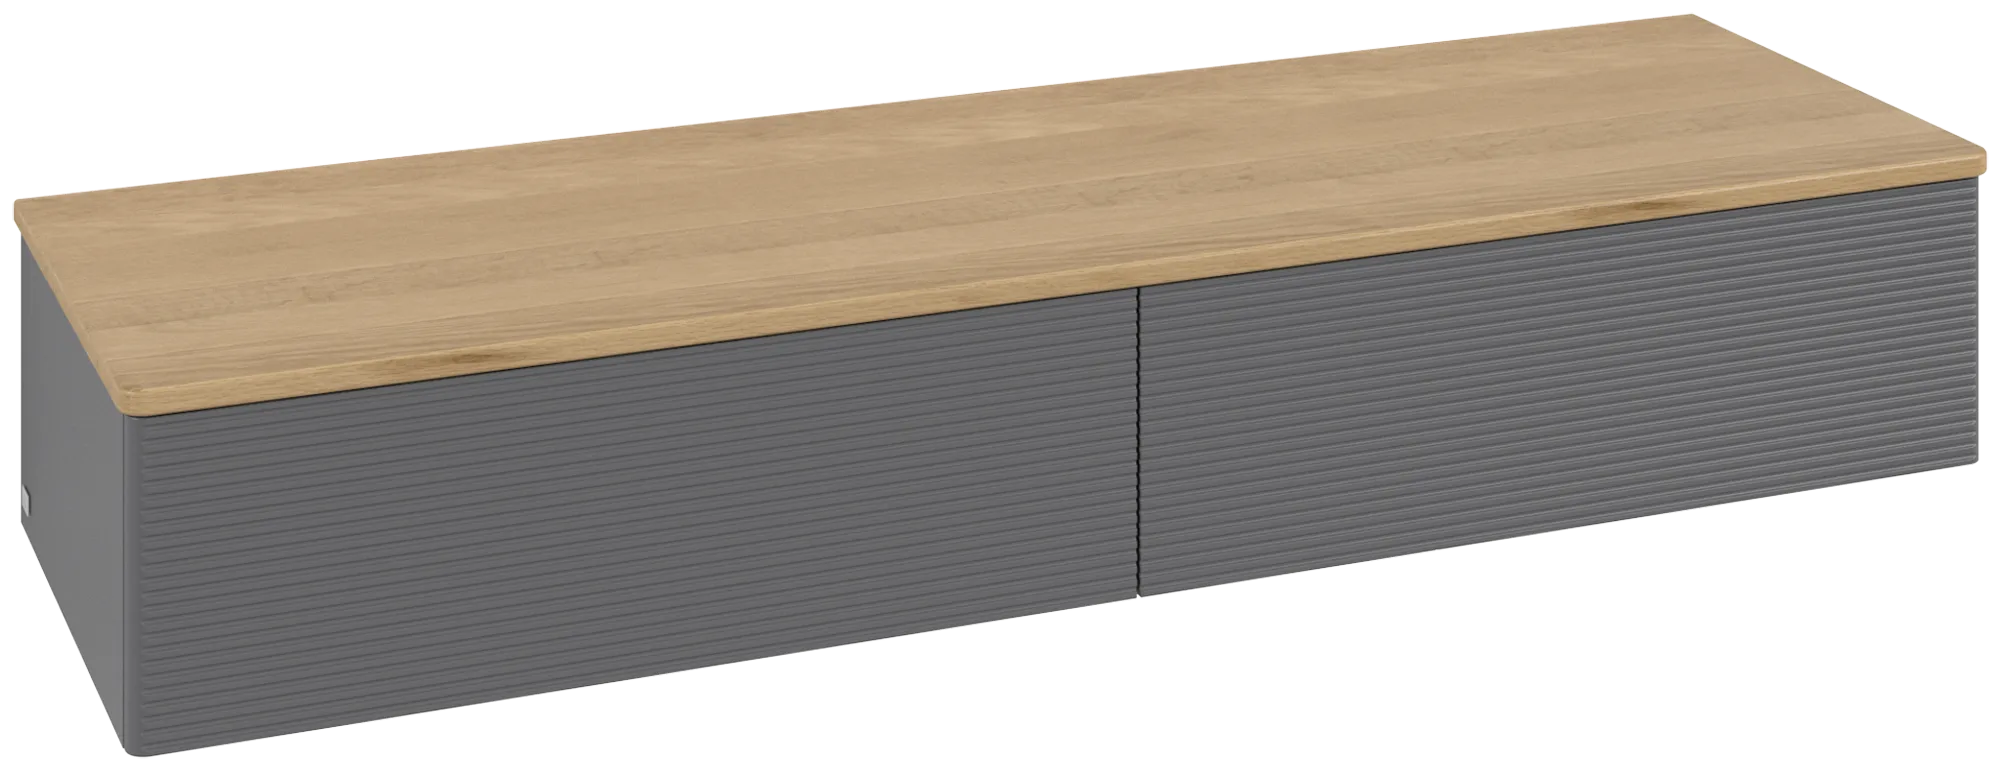 Picture of VILLEROY BOCH Antao Sideboard, 2 pull-out compartments, 1600 x 268 x 500 mm, Front with grain texture, Anthracite Matt Lacquer / Honey Oak #K42101GK